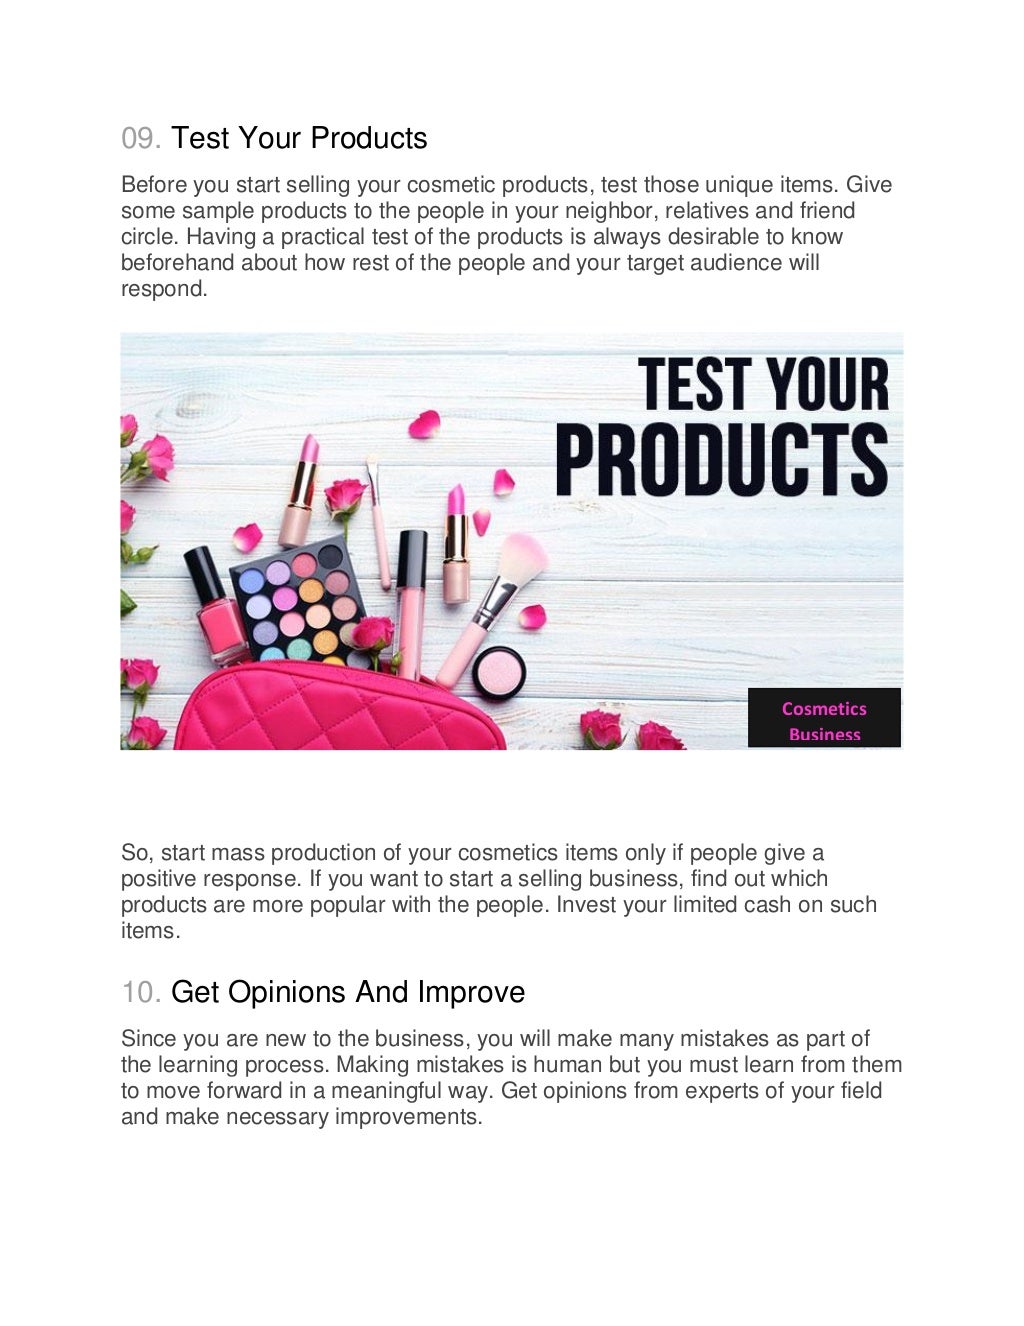 Top 10 Tips For Starting Your Own Cosmetics Business